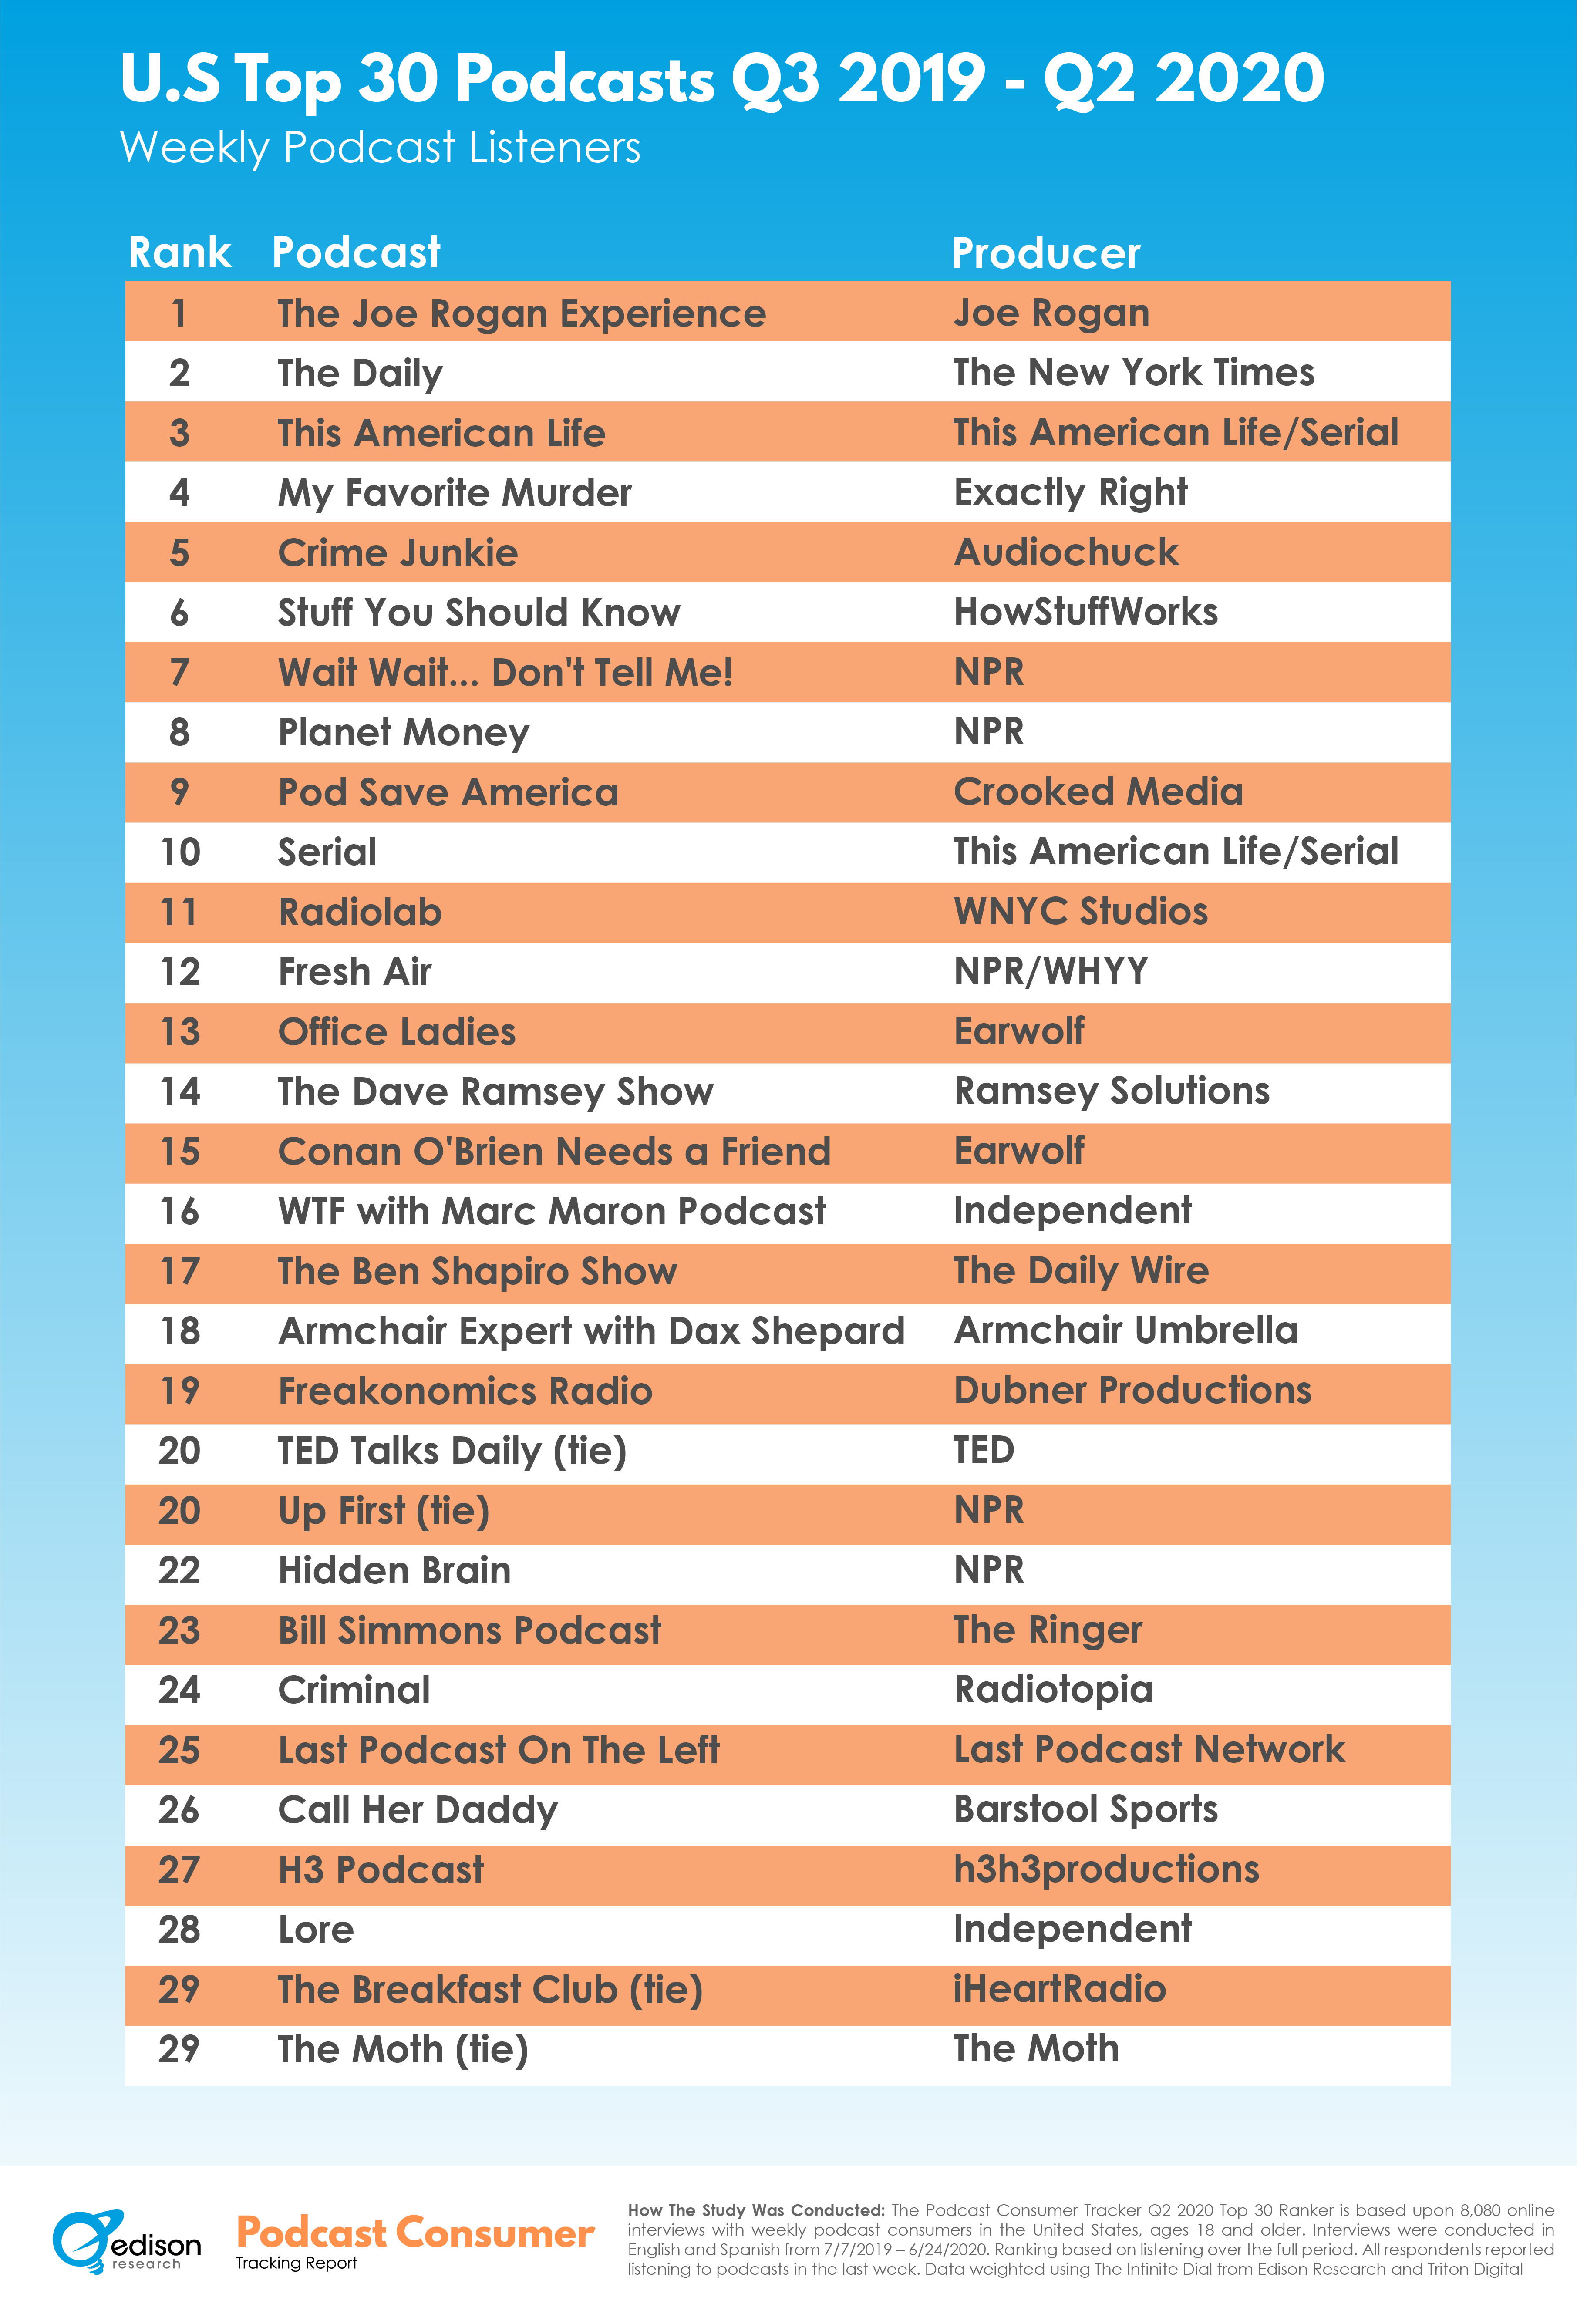 The Top 30 U.S. Podcasts According to the Podcast Consumer Tracker